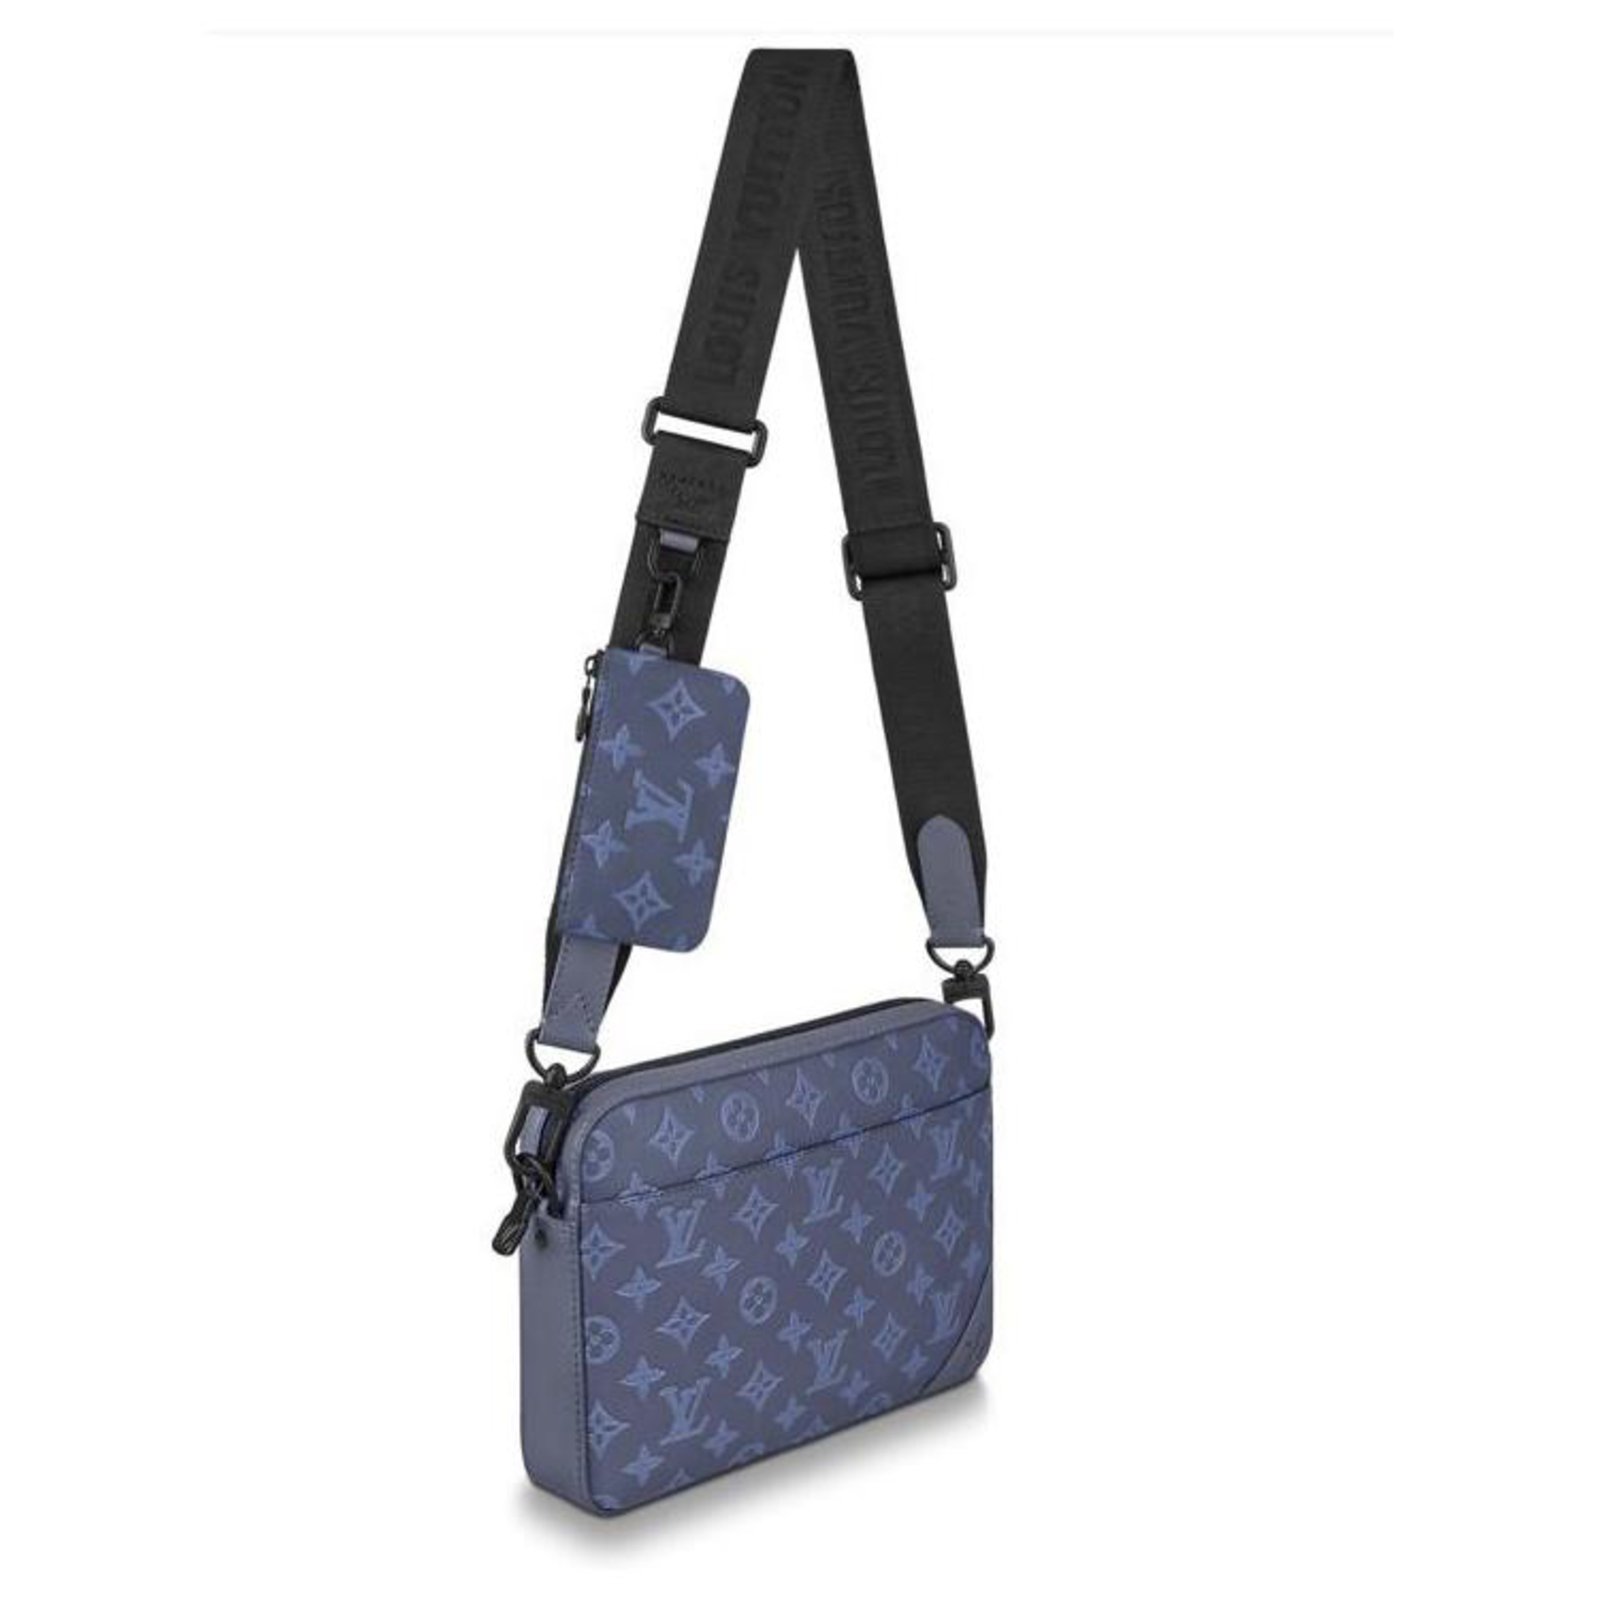 Very Chic Louis Vuitton Messenger handbag in Navy blue Taïga leather, SHW  For Sale at 1stDibs